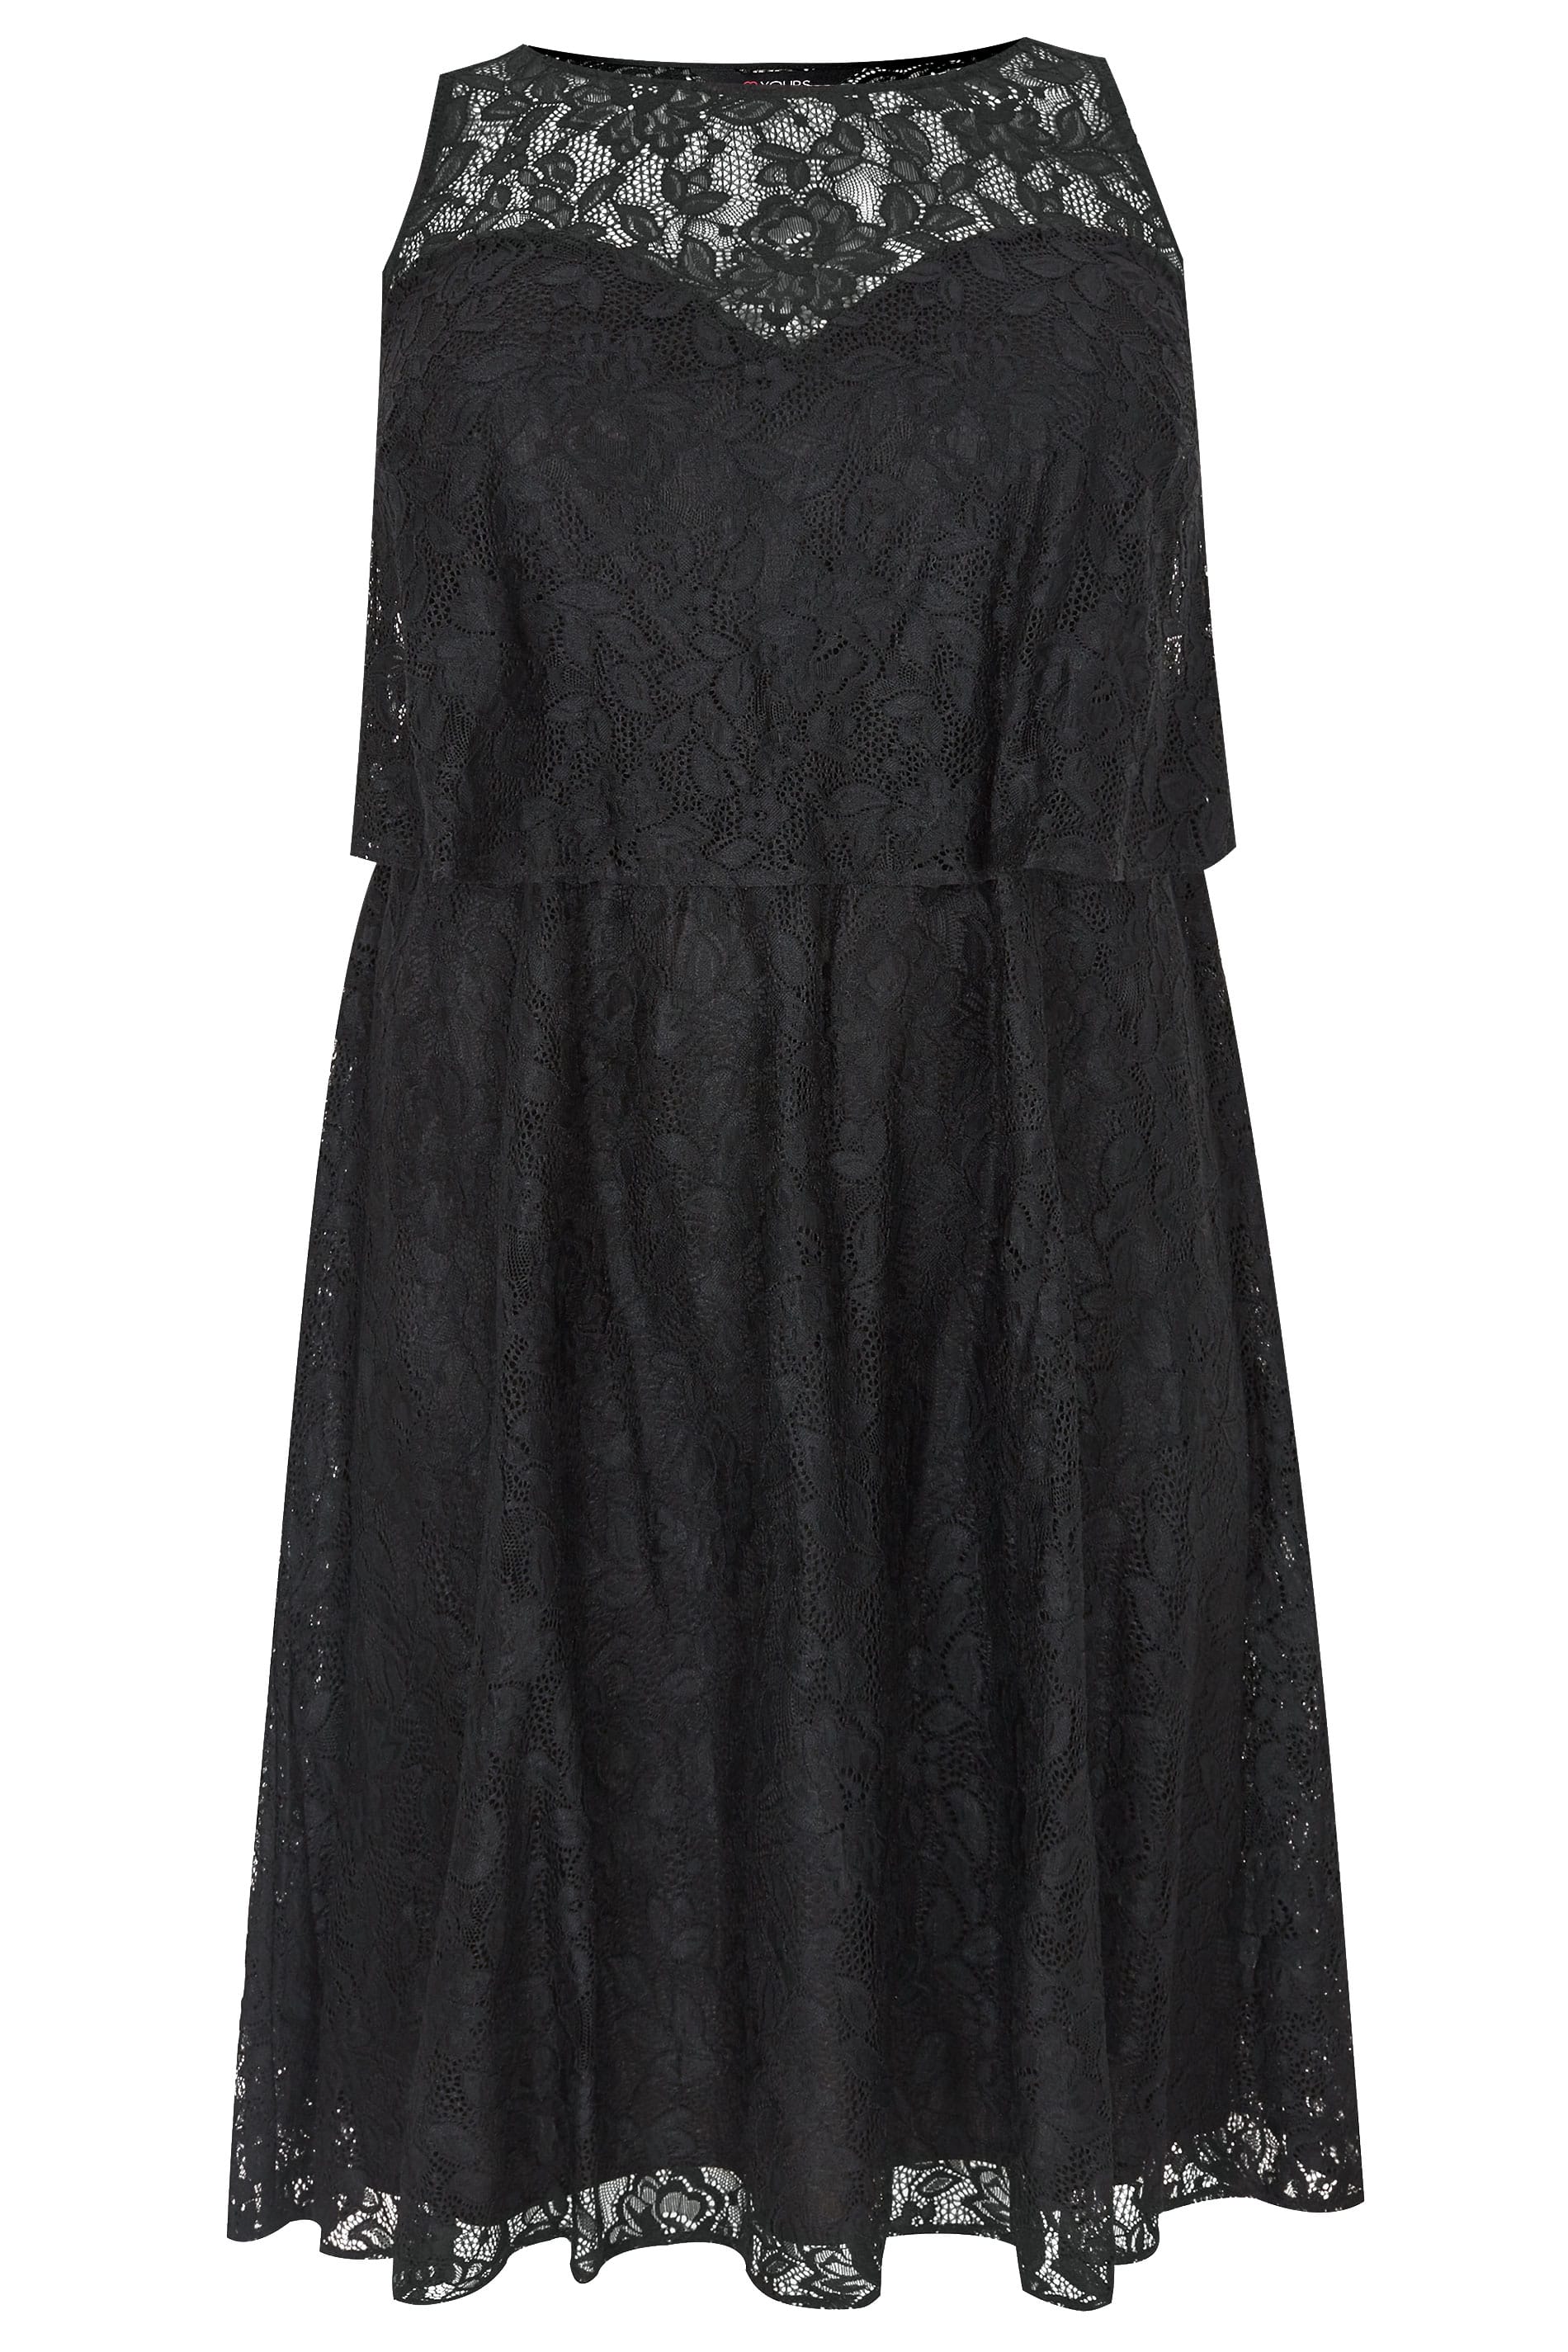 Plus Size Black Layered Lace Dress | Sizes 16 to 36 | Yours Clothing